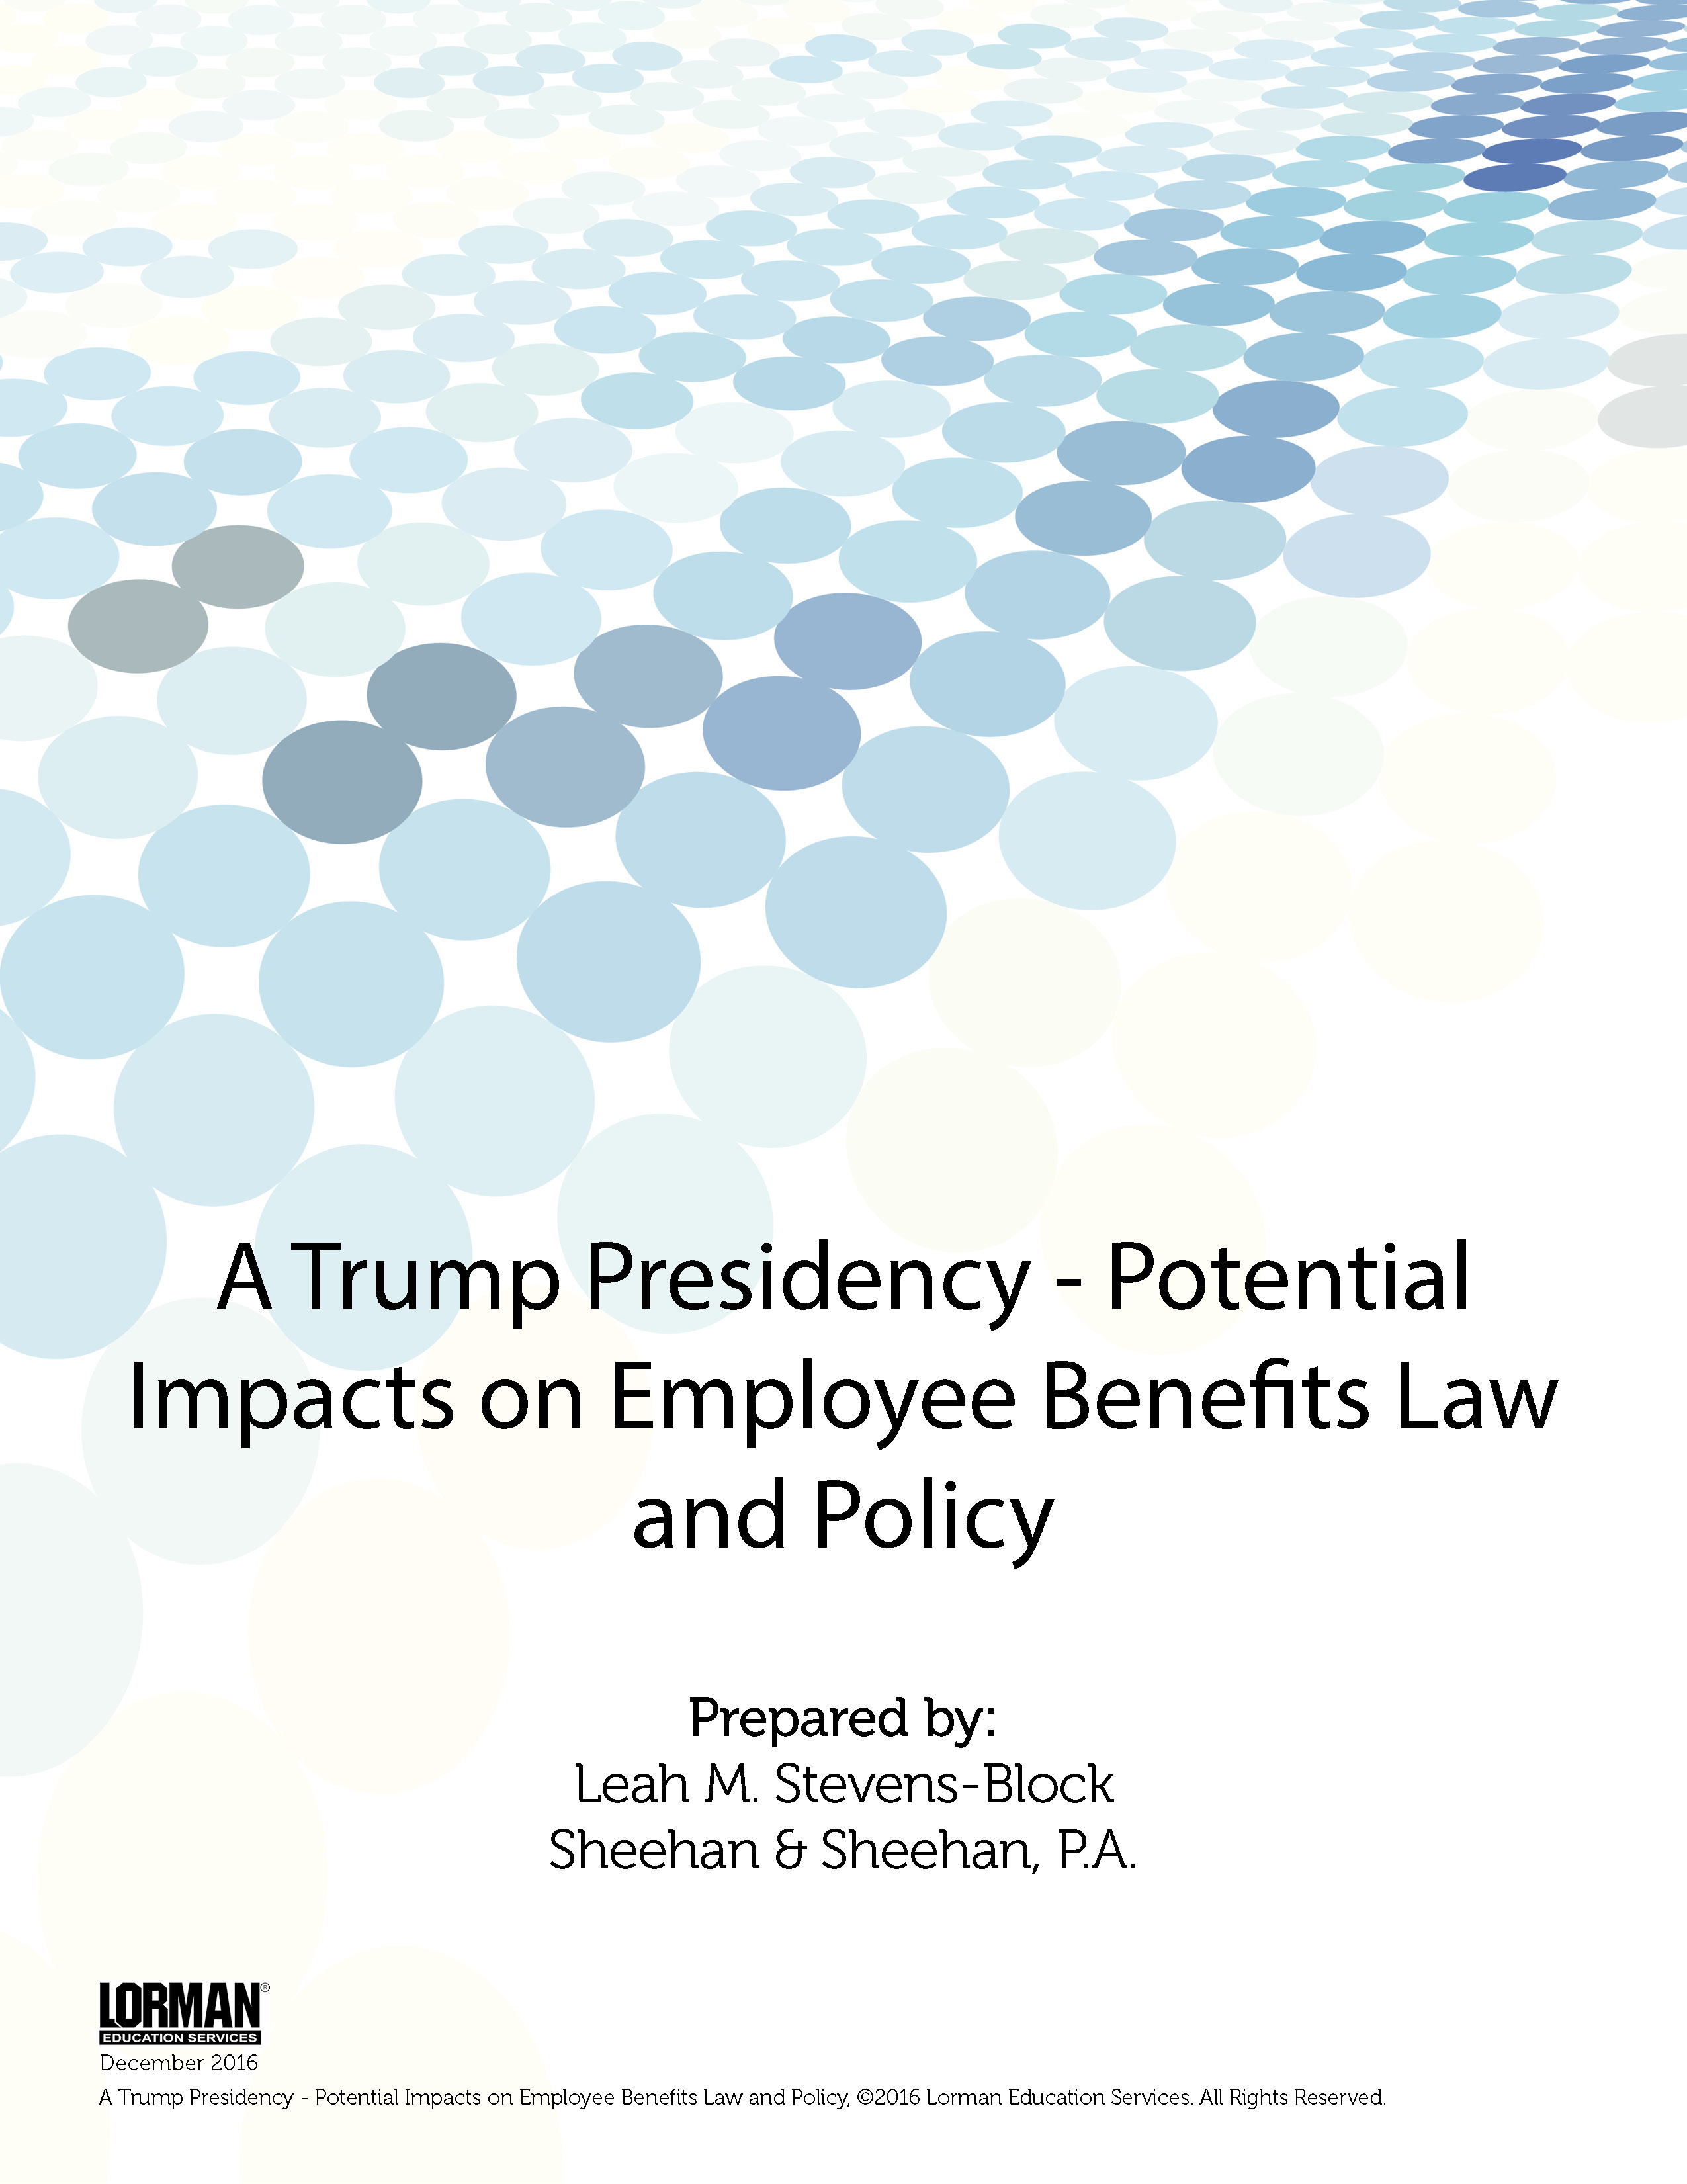 A Trump Presidency - Potential Impacts on Employee Benefits Law and Policy